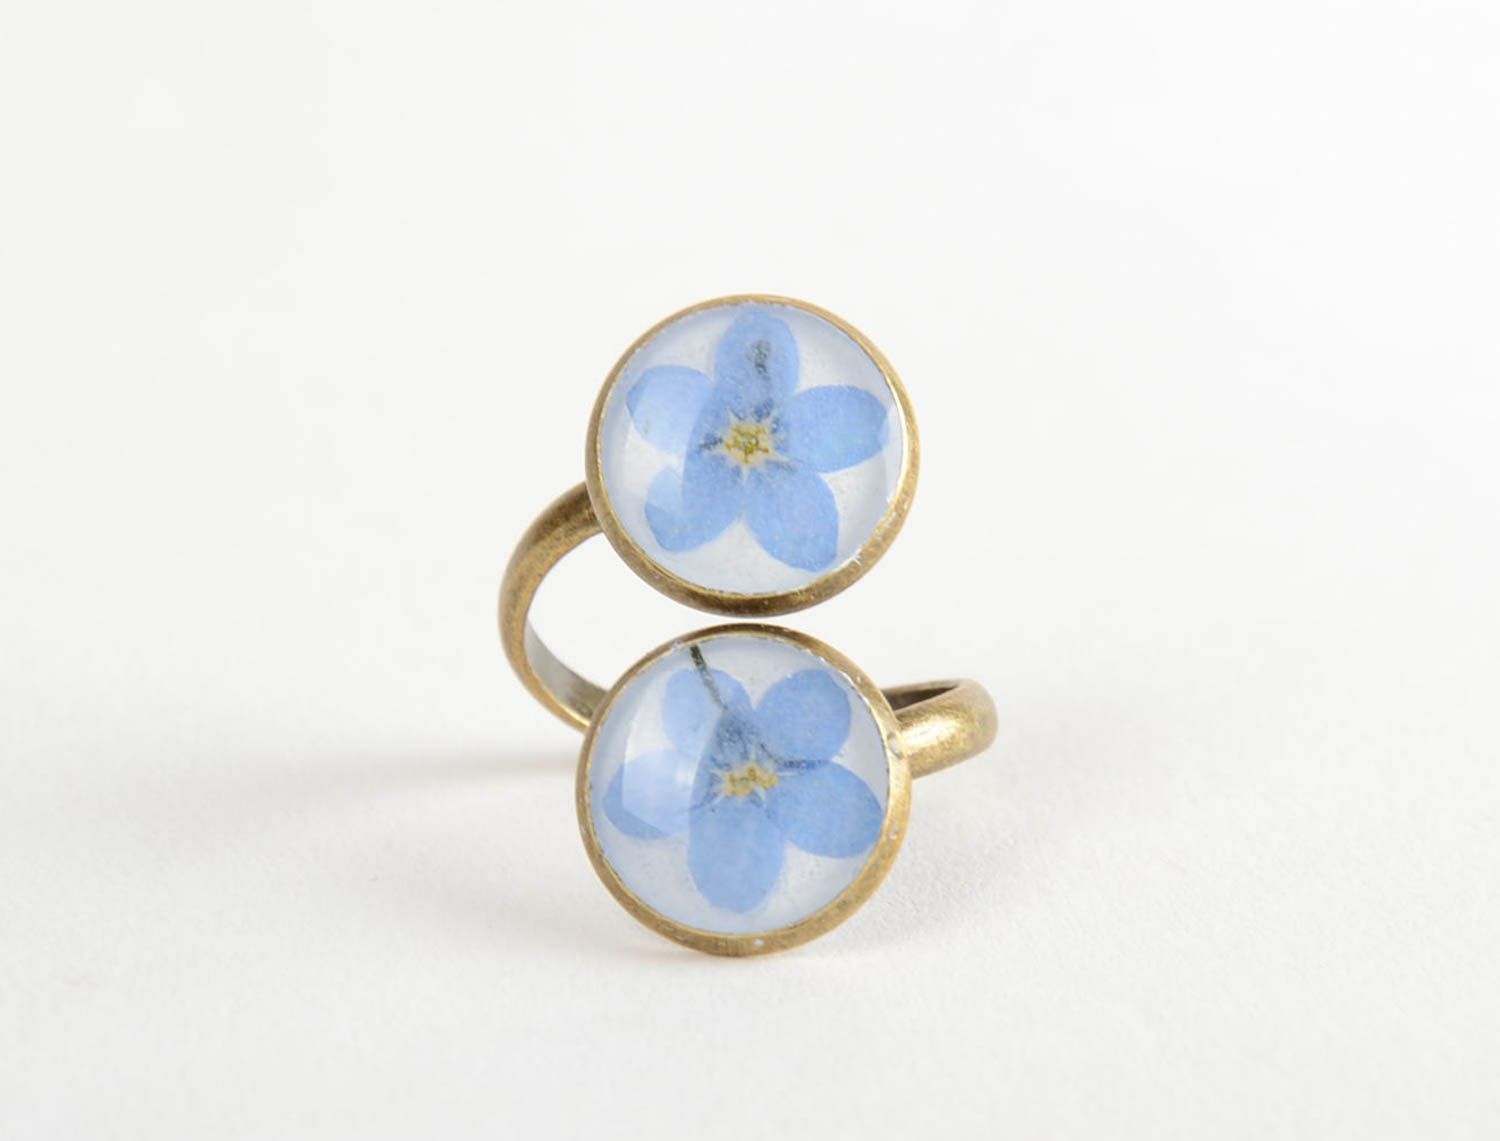 Handmade exquisite metal jewelry ring with blue flowers in epoxy resin photo 3